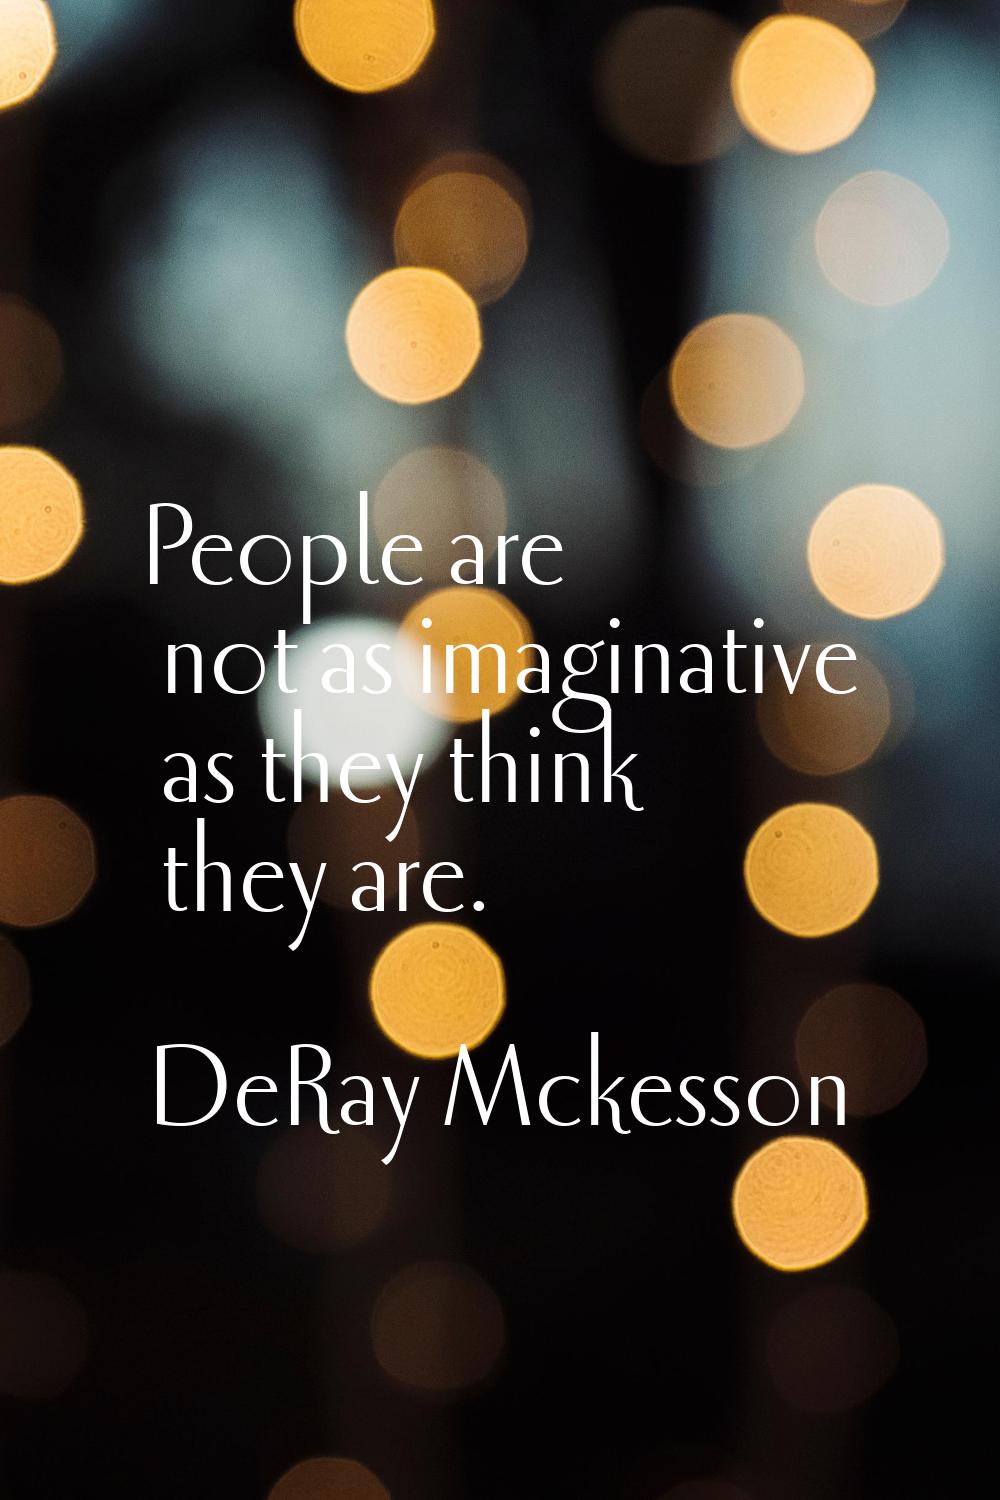 People are not as imaginative as they think they are.